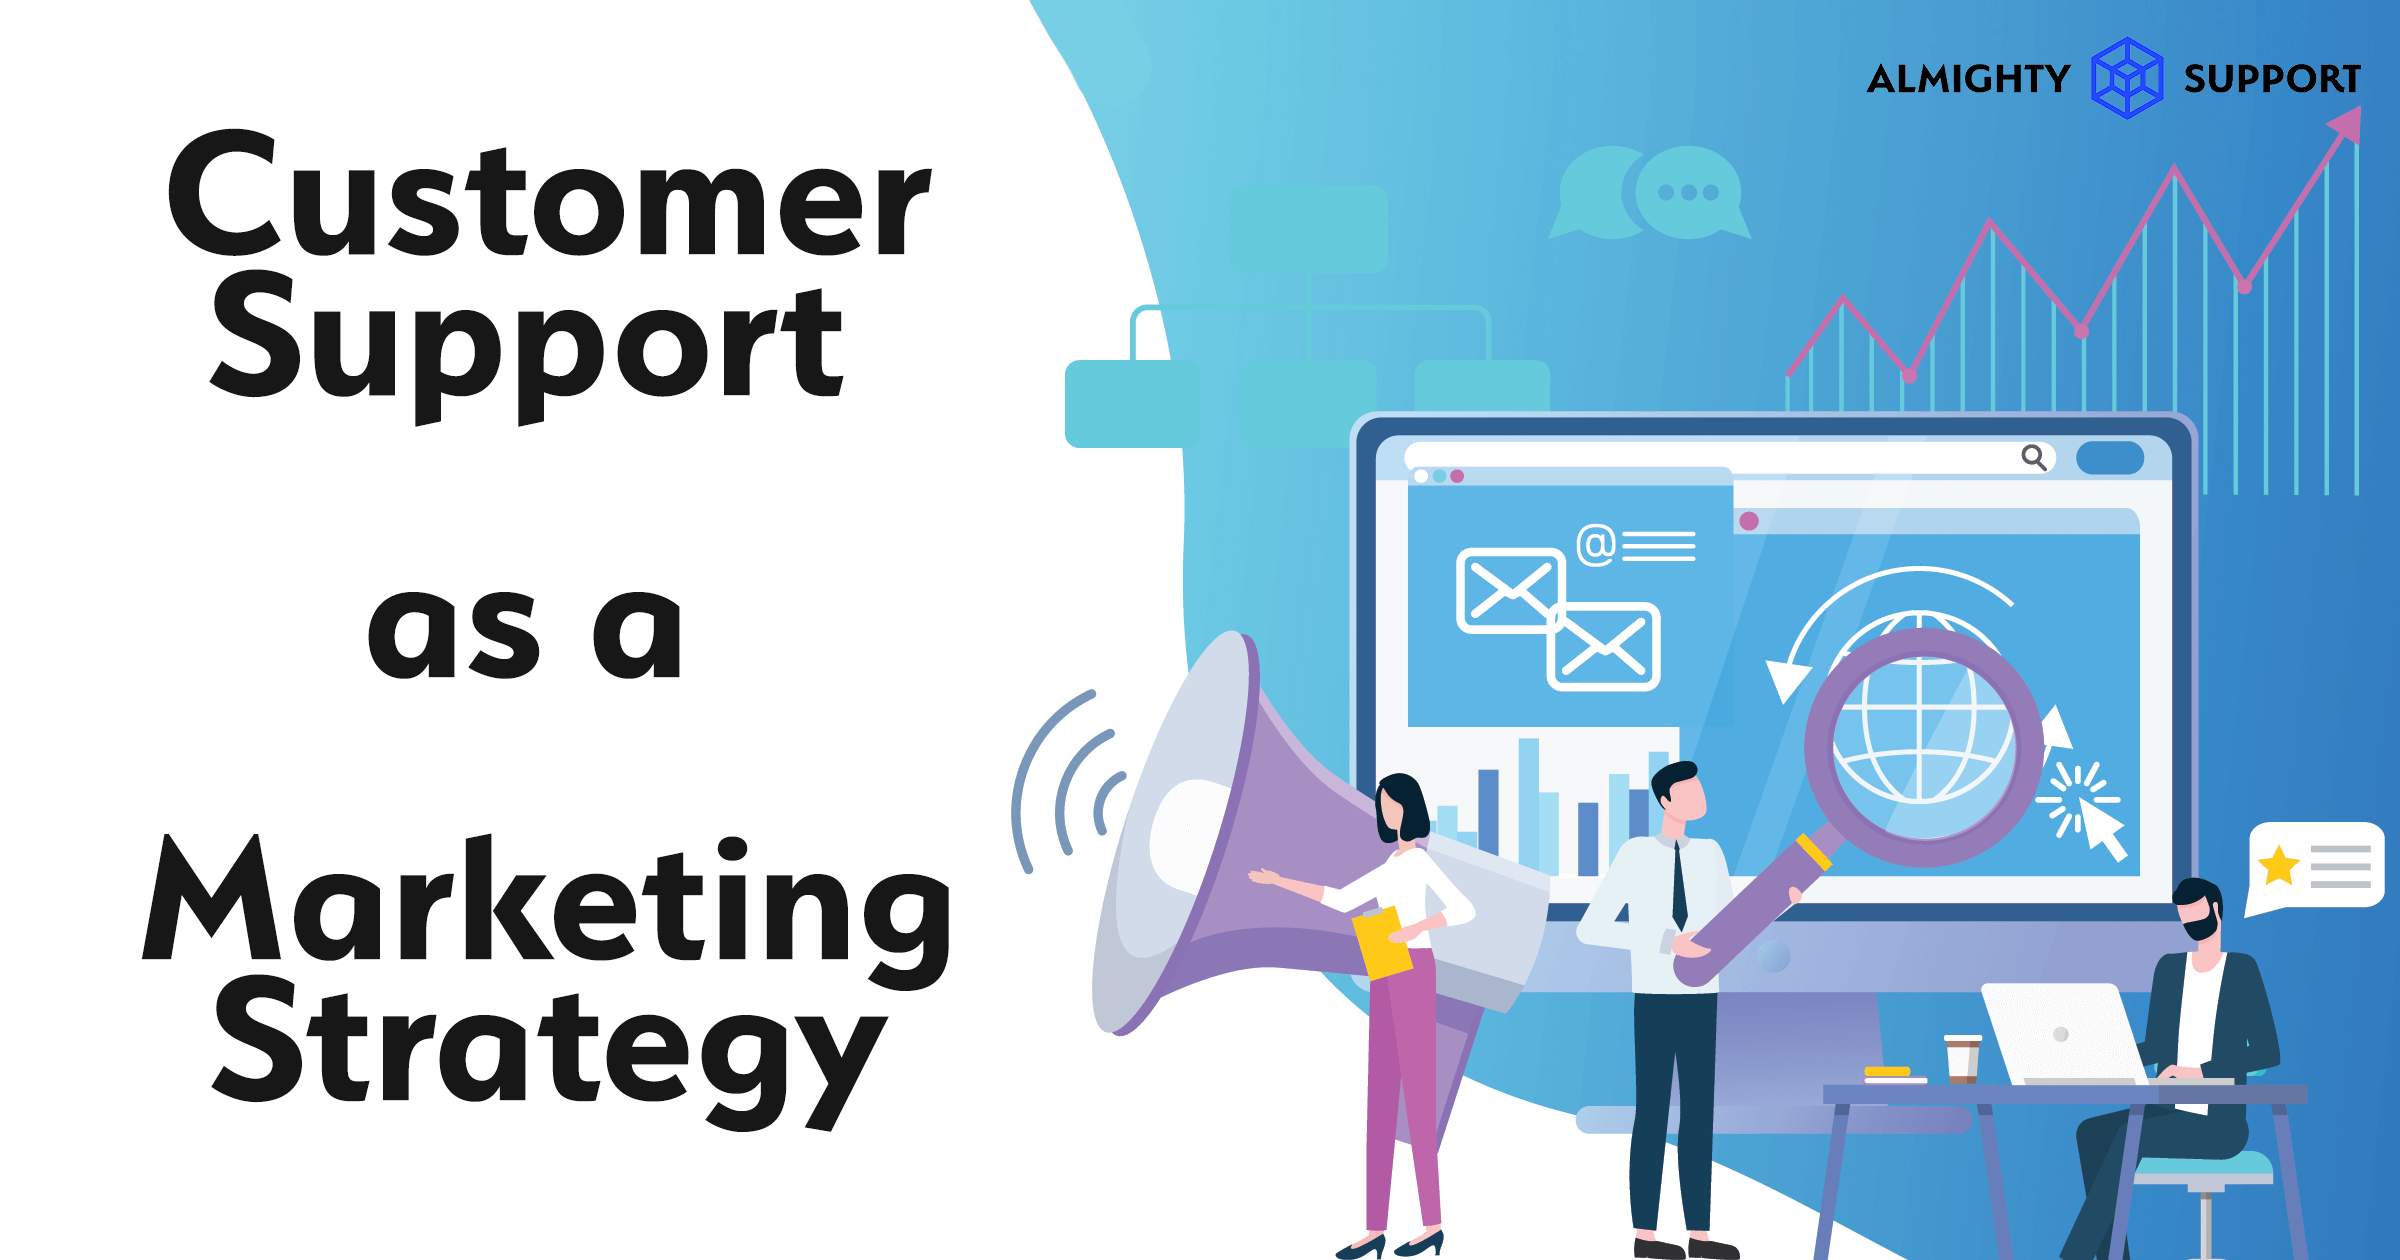 Customer Support as a Marketing Strategy